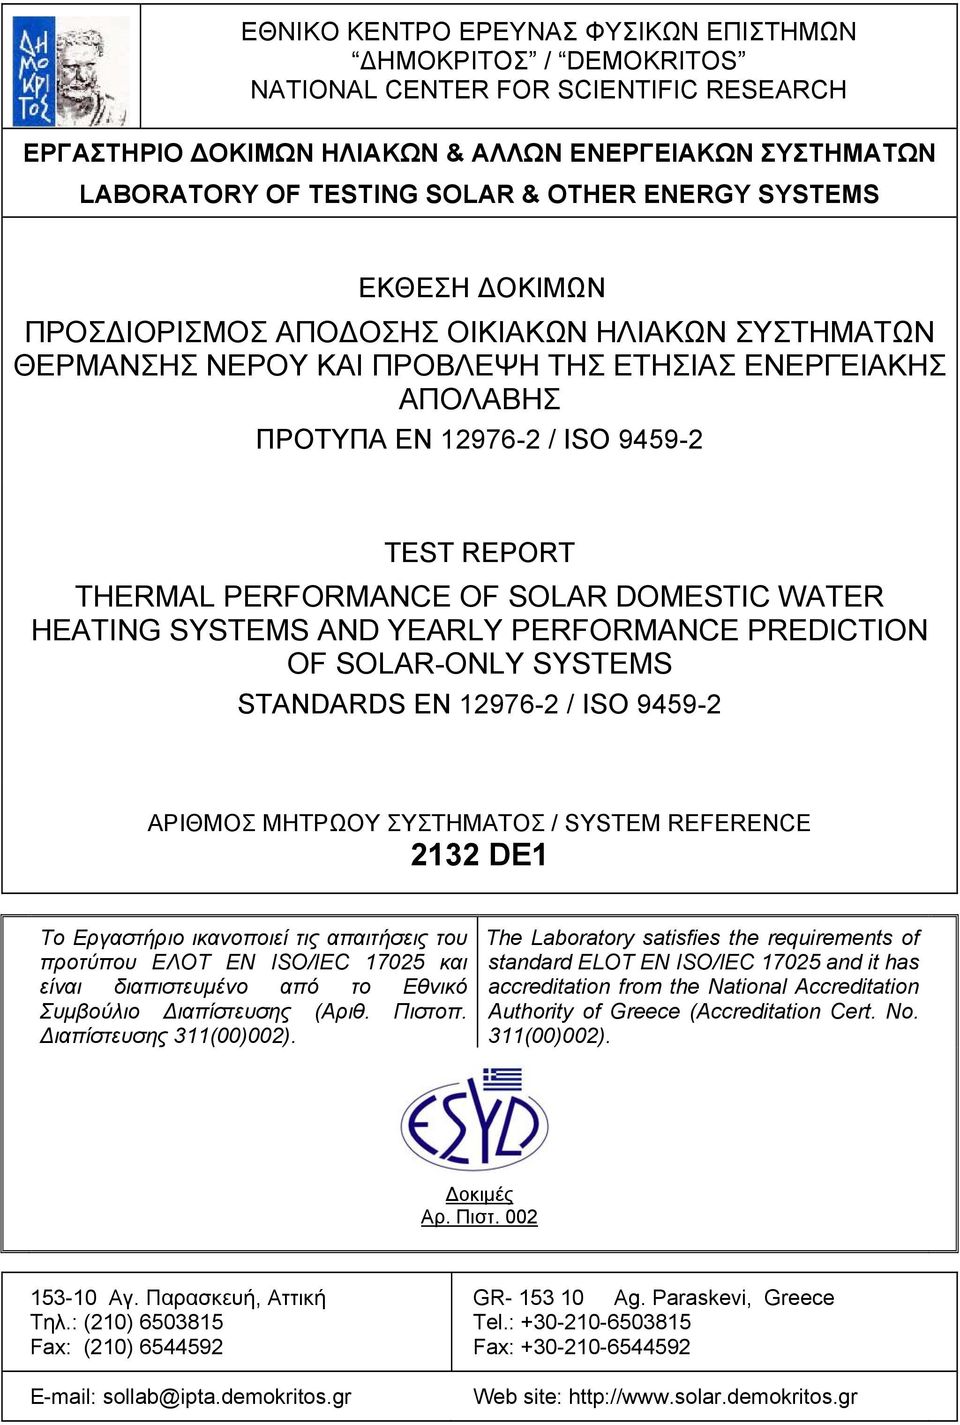 PERFORMANCE OF SOLAR DOMESTIC WATER HEATING SYSTEMS AND YEARLY PERFORMANCE PREDICTION OF SOLAR-ONLY SYSTEMS STANDARDS EN 12976-2 / ISO 9459-2 ΑΡΙΘΜΟΣ ΜΗΤΡΩΟΥ ΣΥΣΤΗΜΑΤΟΣ / SYSTEM REFERENCE 2132 DE1 Το